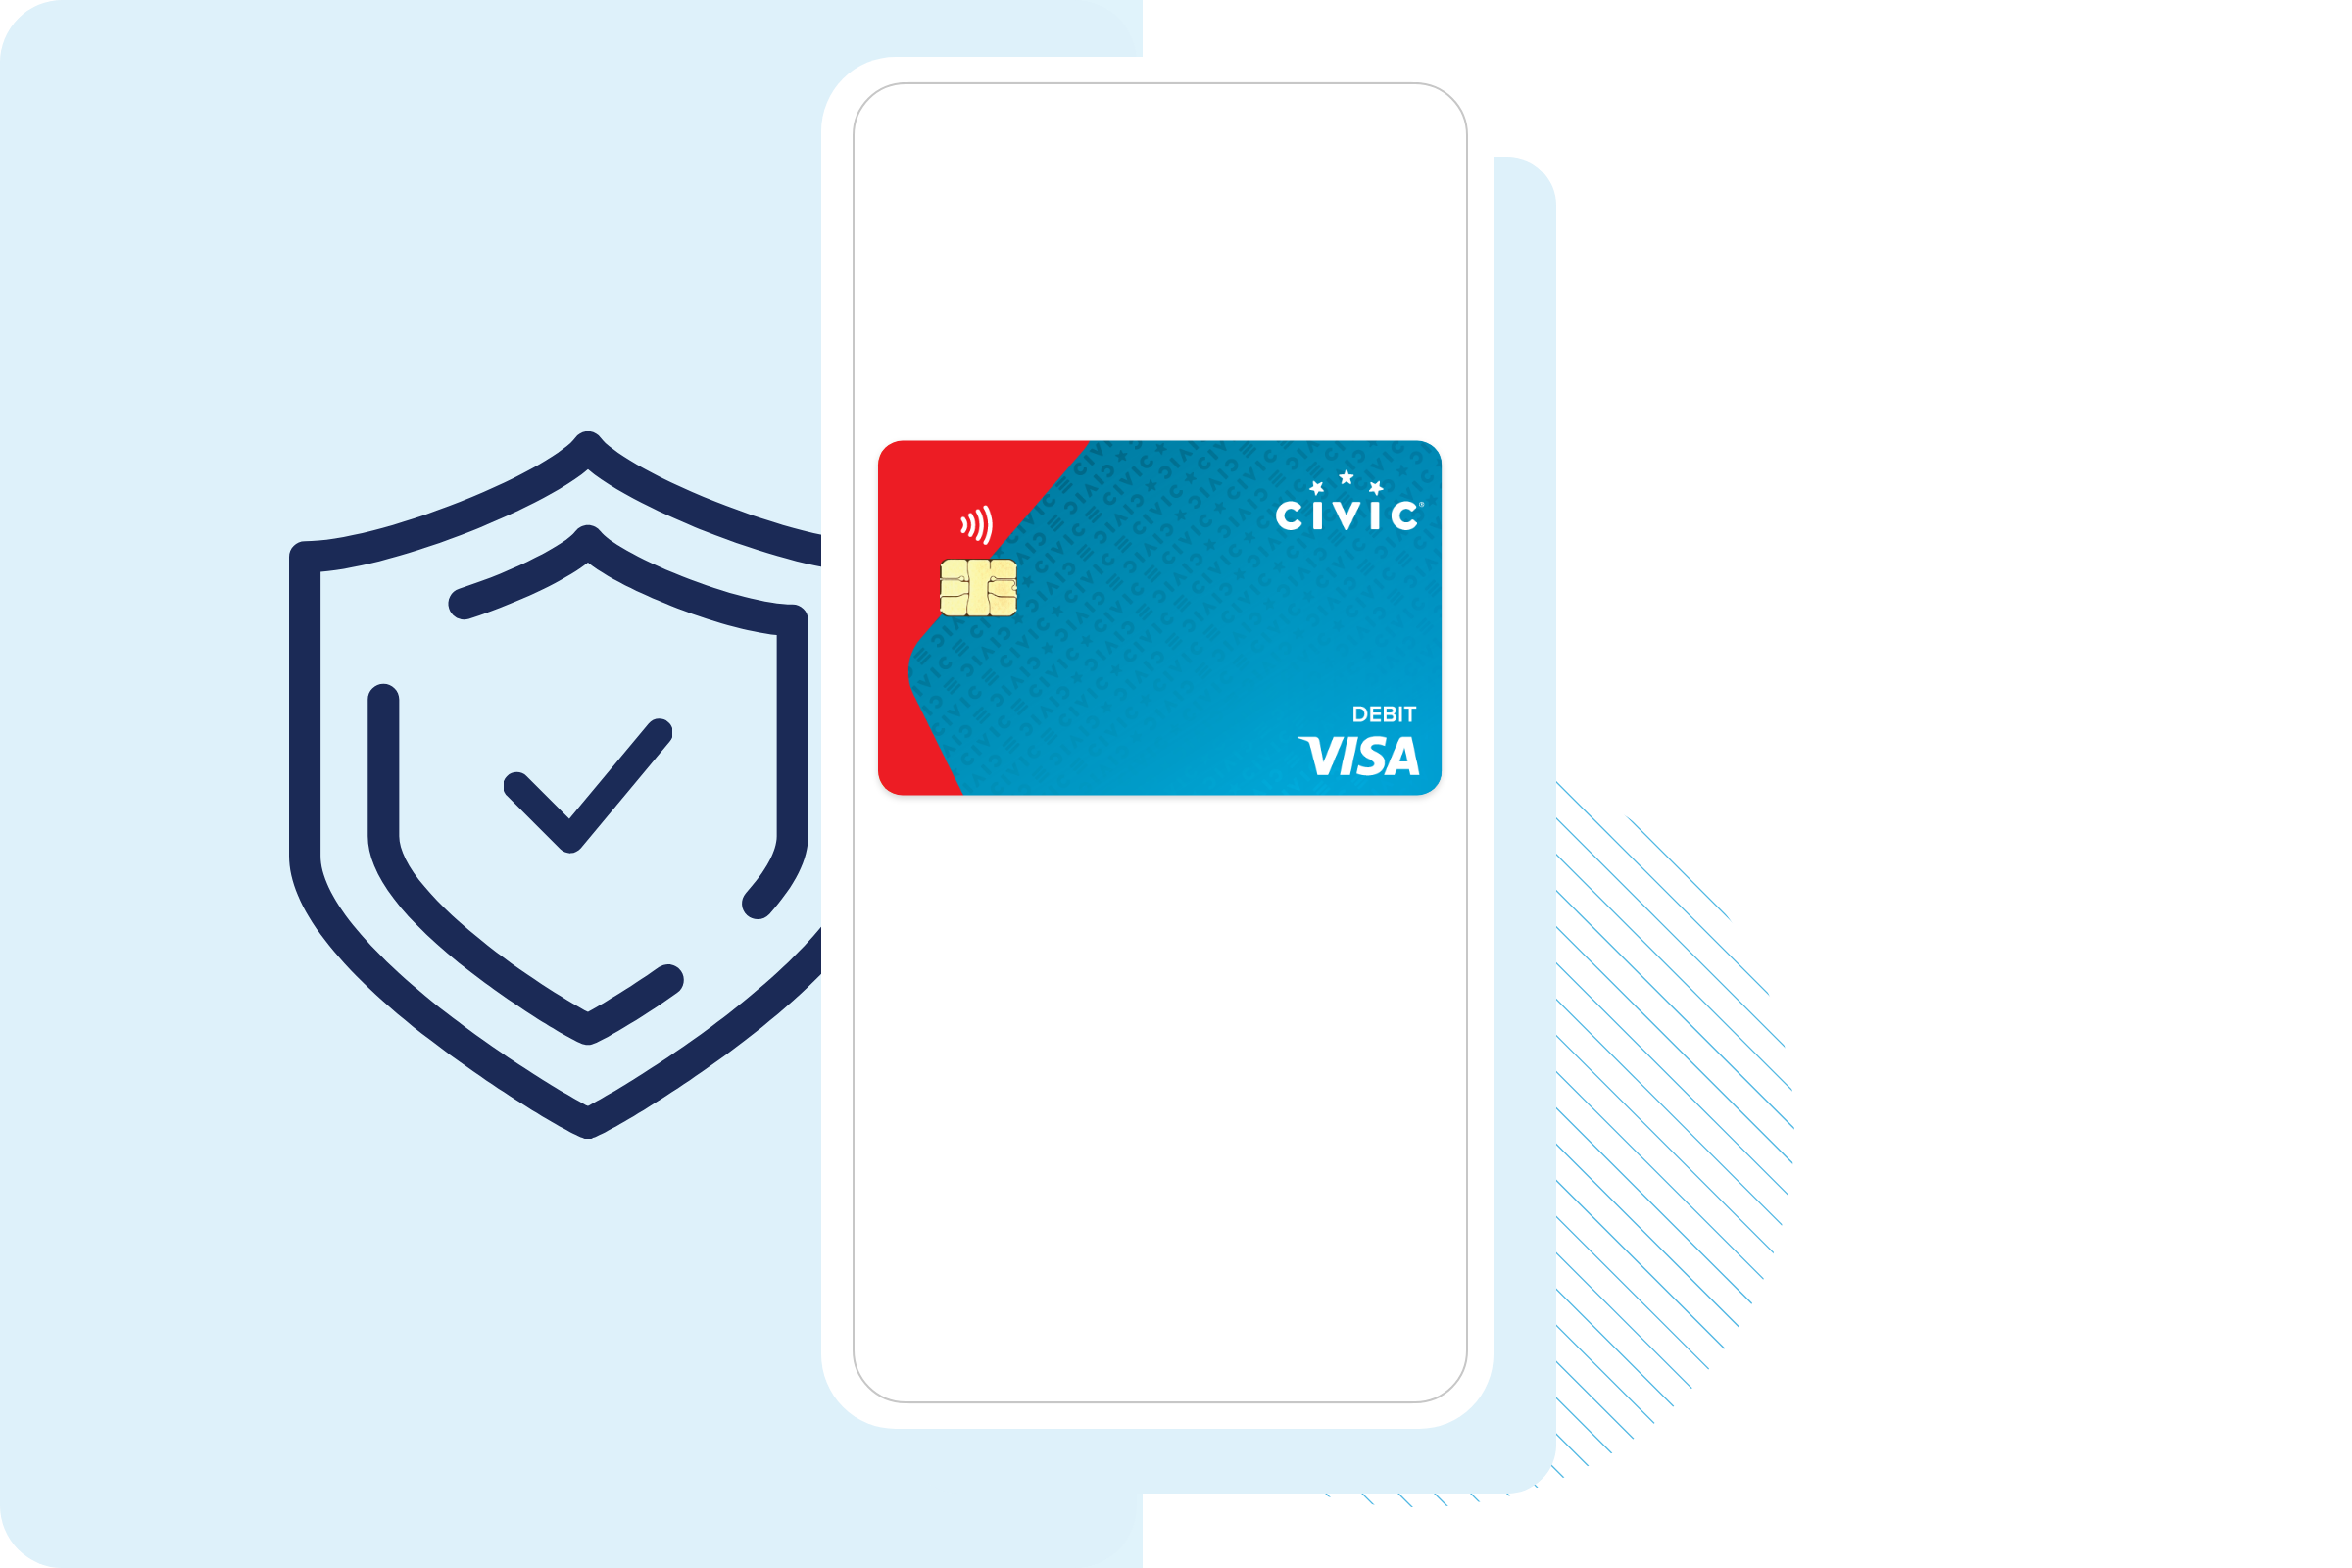 Use Civic debit card on your phone - just tap and go!